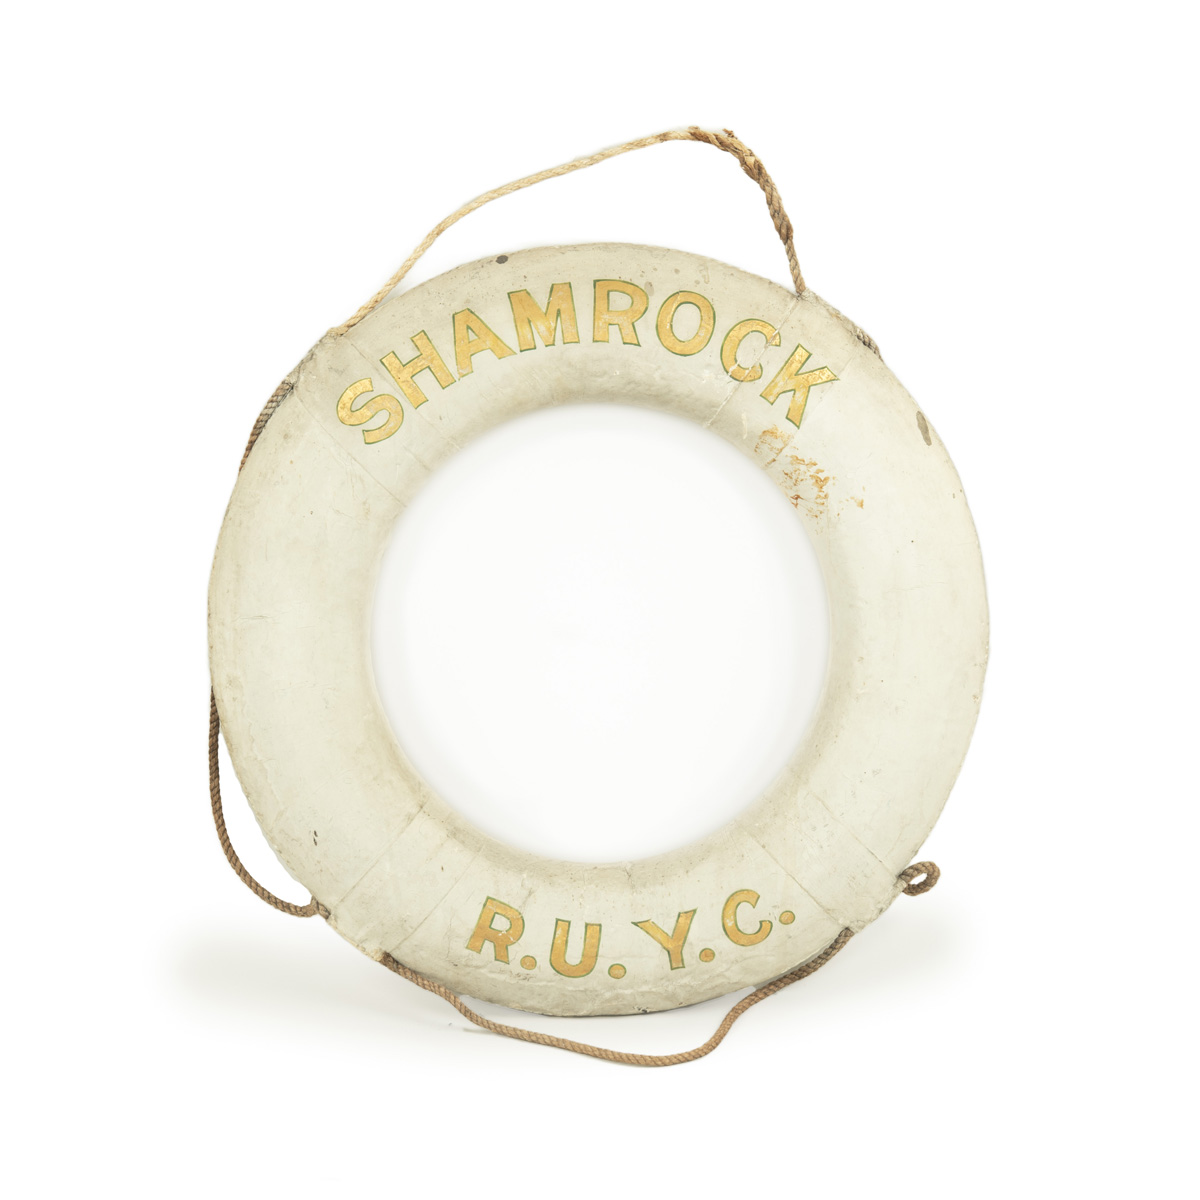 An original life ring from the America’s Cup yacht ‘Shamrock’, Royal Ulster Yacht Club,